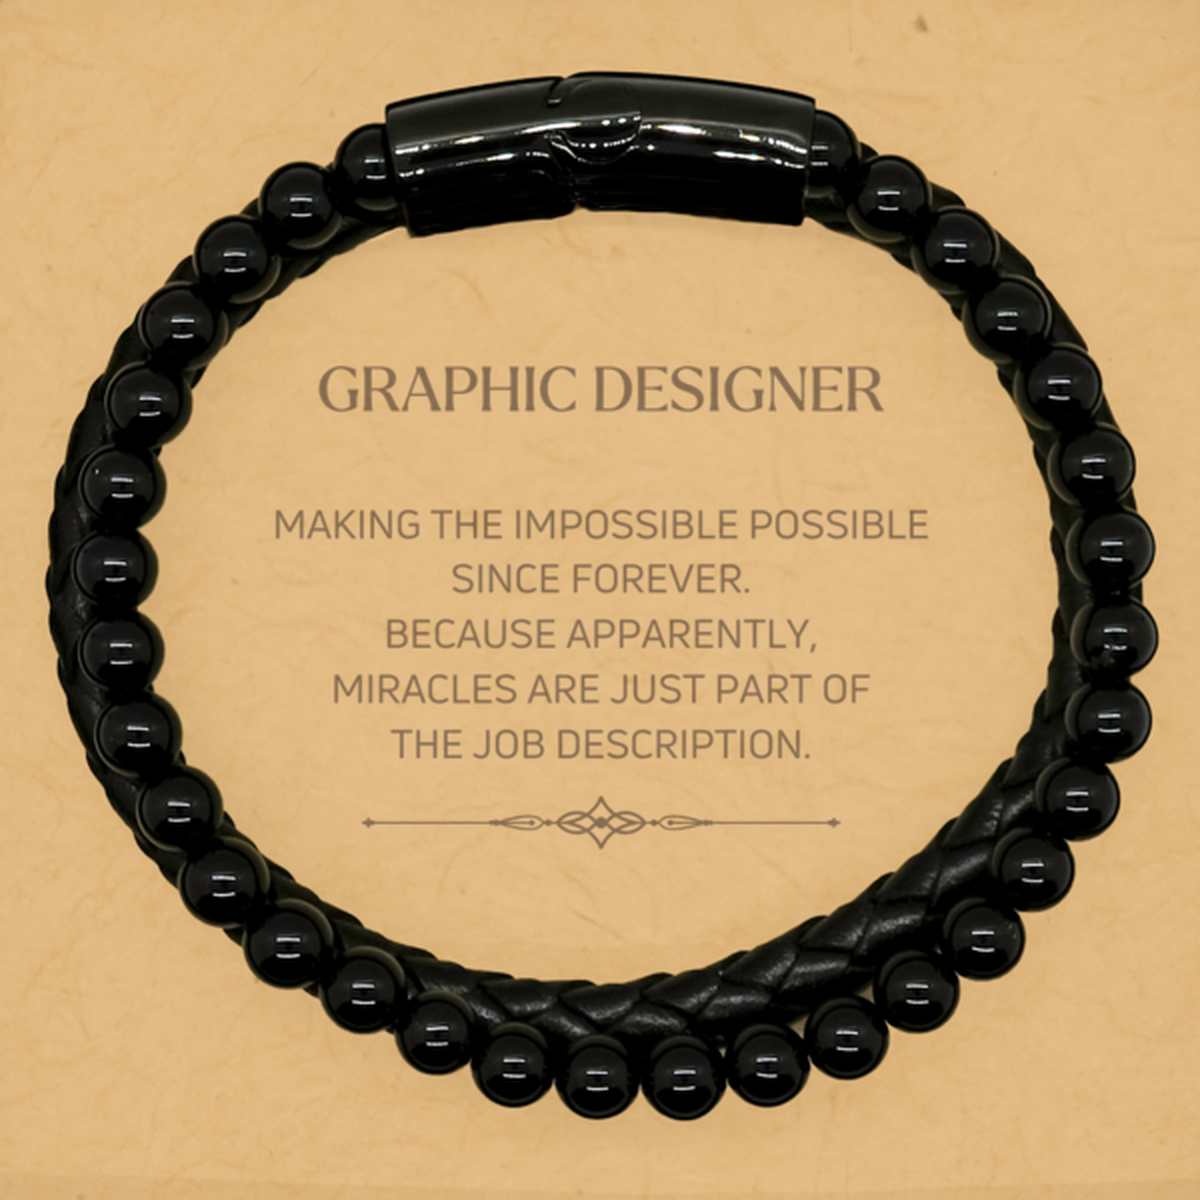 Funny Graphic Designer Gifts, Miracles are just part of the job description, Inspirational Birthday Stone Leather Bracelets For Graphic Designer, Men, Women, Coworkers, Friends, Boss